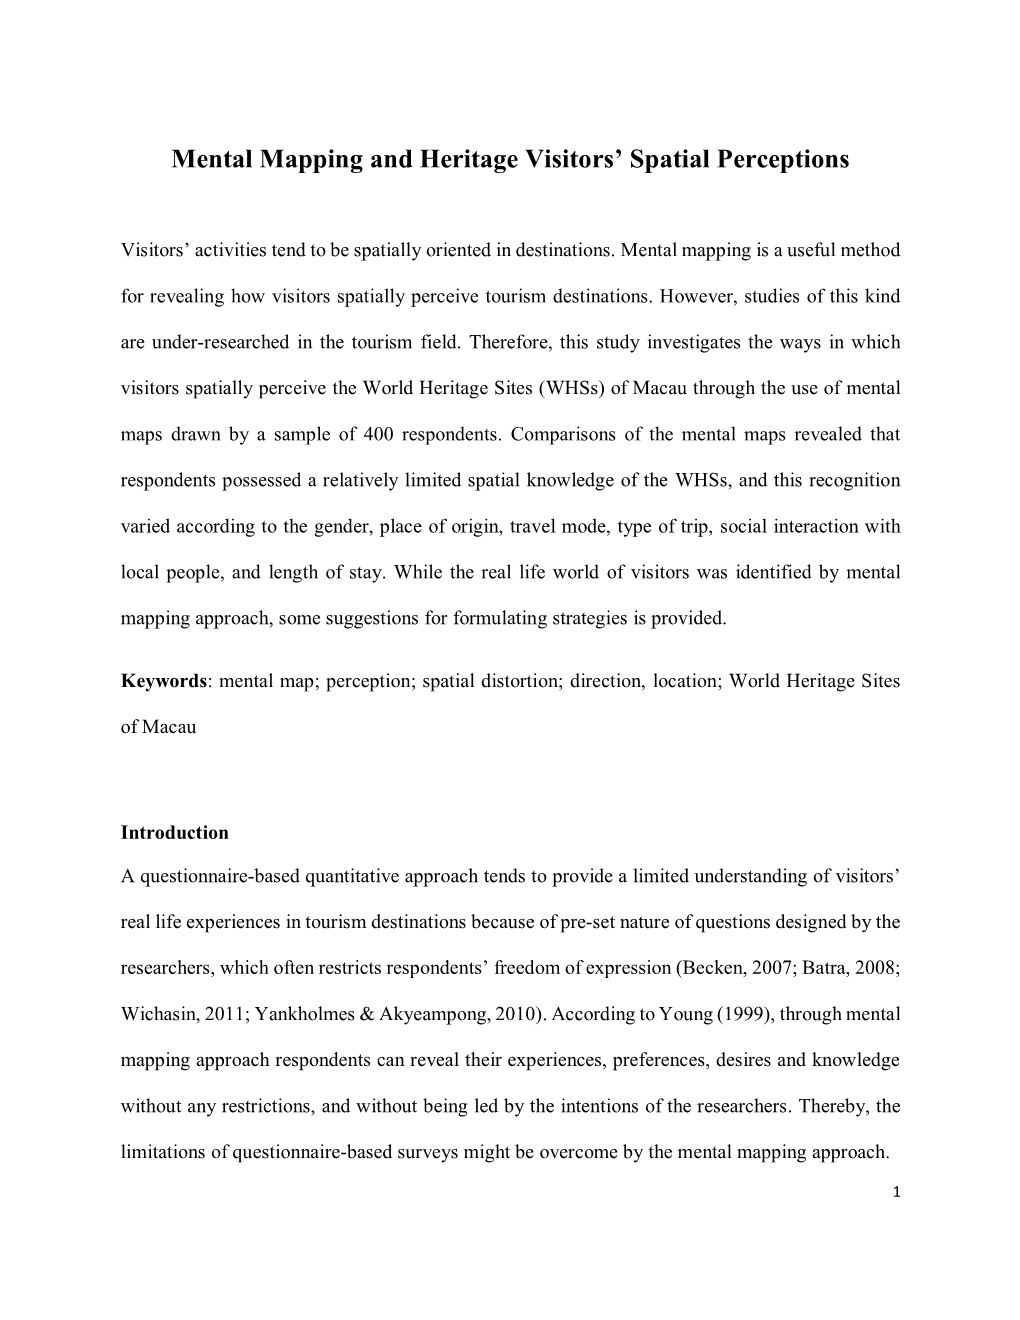 Mental Mapping and Heritage Visitors' Spatial Perceptions